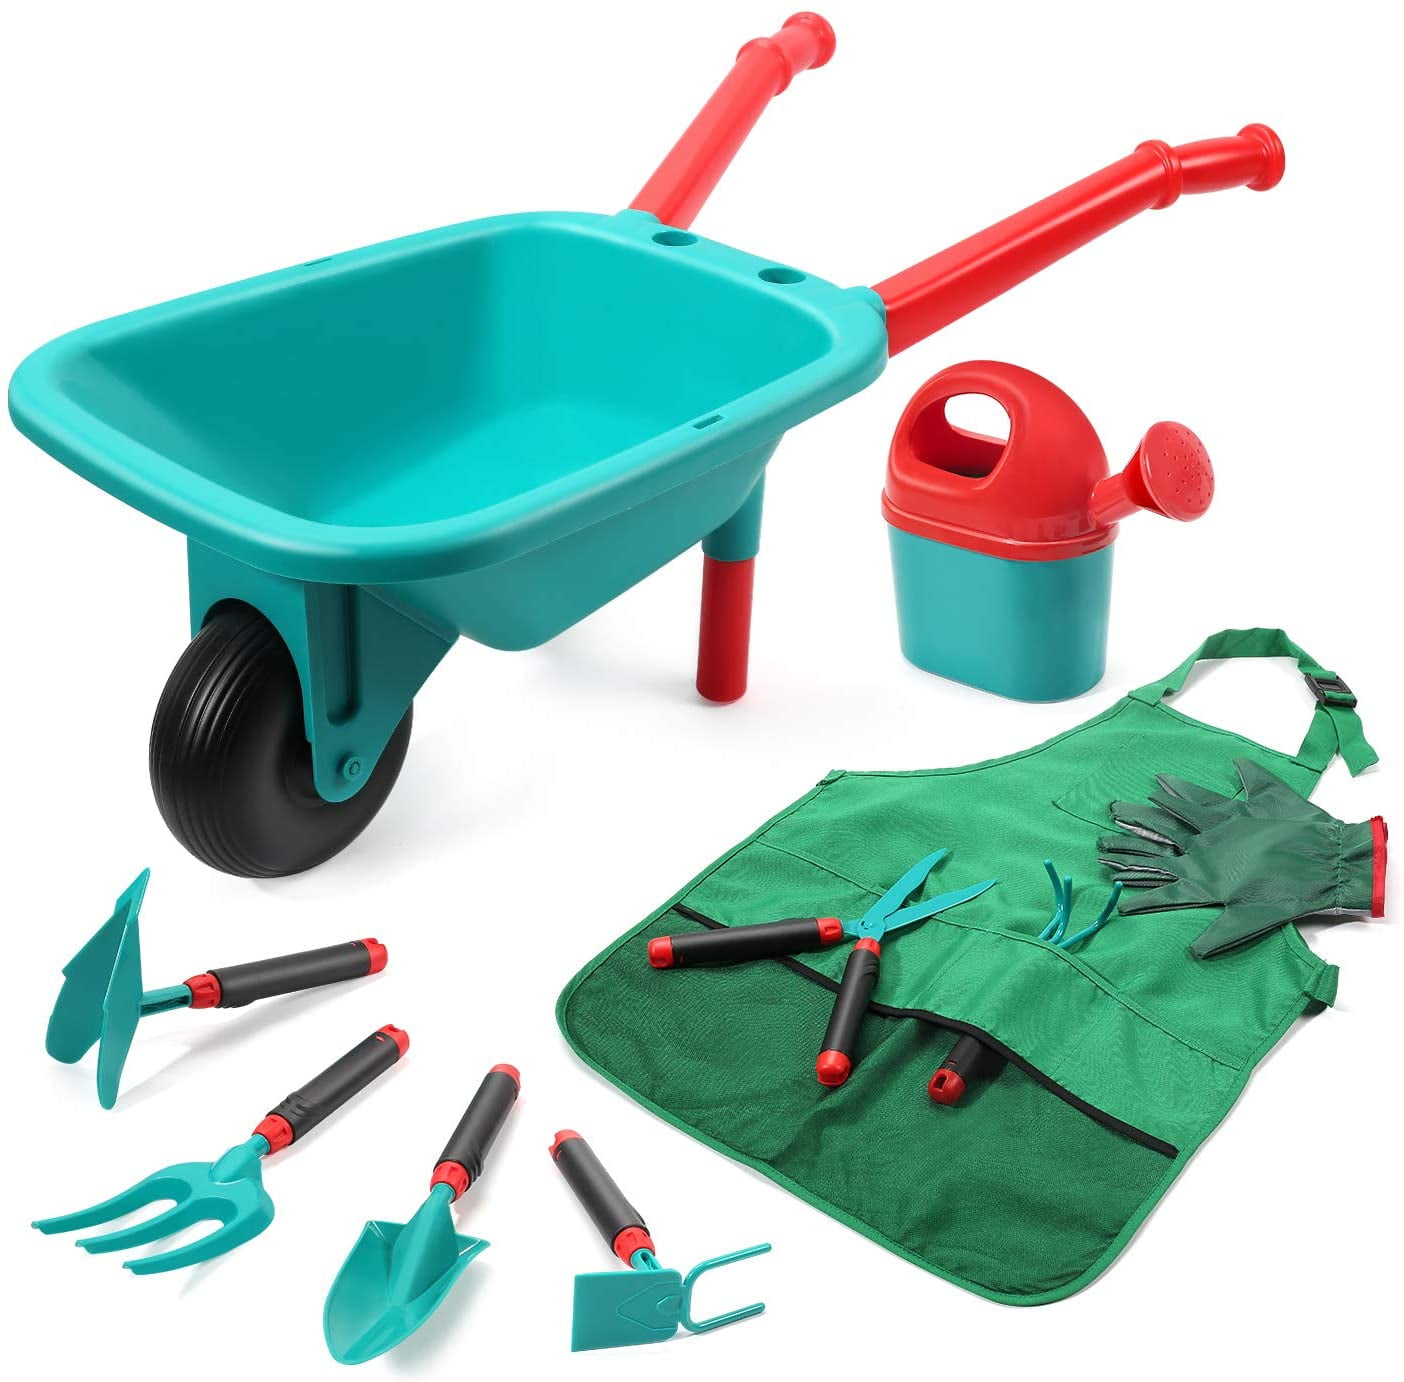 Watering Cans Hoe and Trowel Pretend Cleaning Gardening Trolley Rake Shovel Blue Garden Play Set shamoluotuo Potted Plants and Tool Trolley Kids Gardening Set with Flower Pots